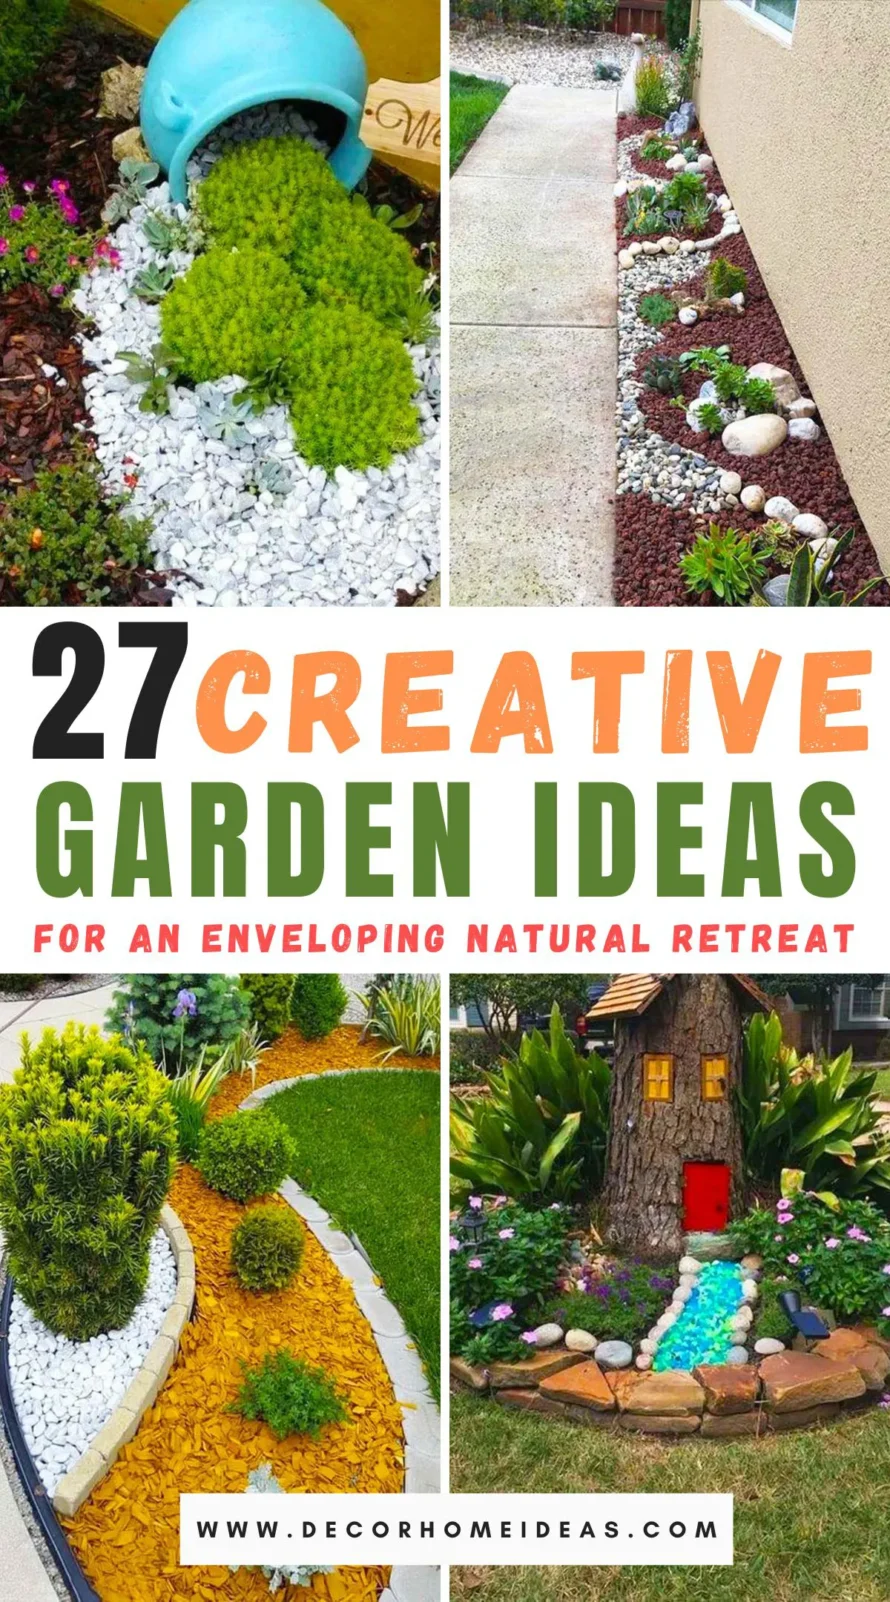 Discover 27 majestic garden designs that promise to envelop you in nature's embrace. Each curated design showcases unique landscaping ideas, ranging from lush greenery to tranquil water features, perfect for creating your own natural retreat. Intrigued? 